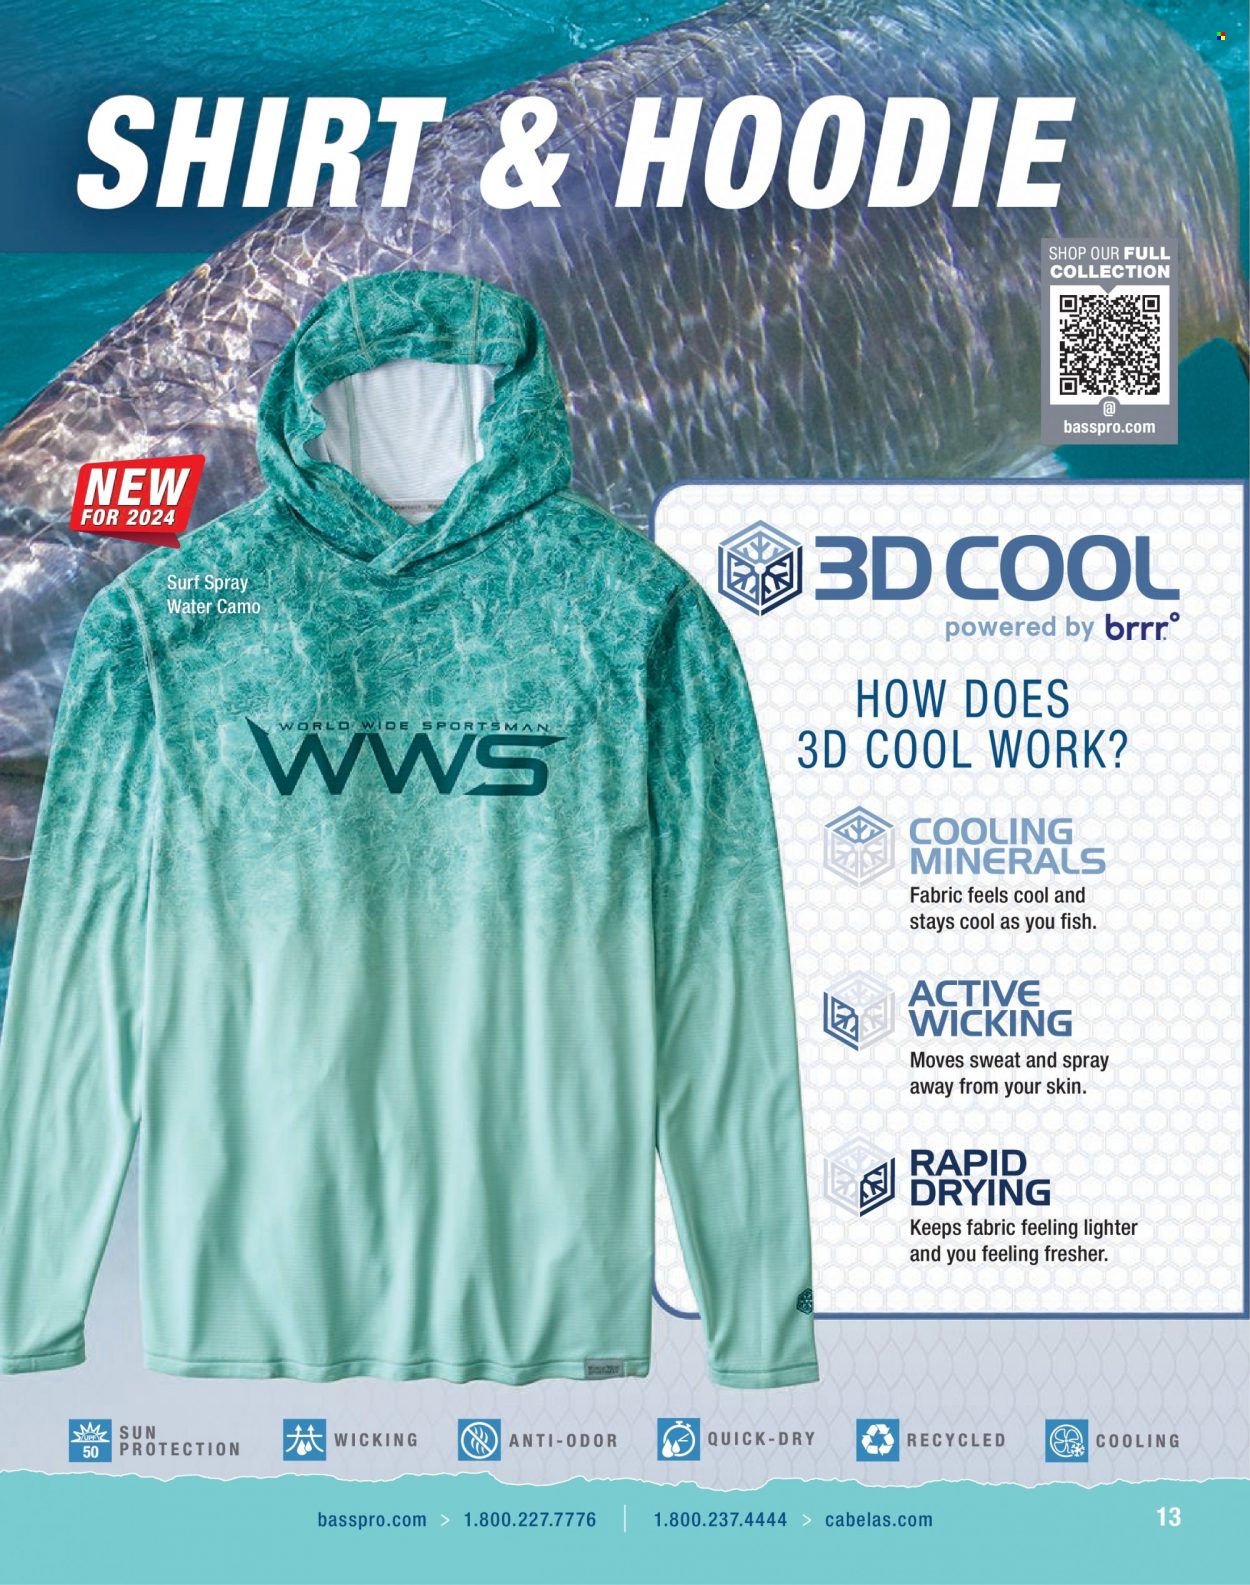 Bass Pro Shops Flyer - Sales products - shirt, hoodie. Page 13.